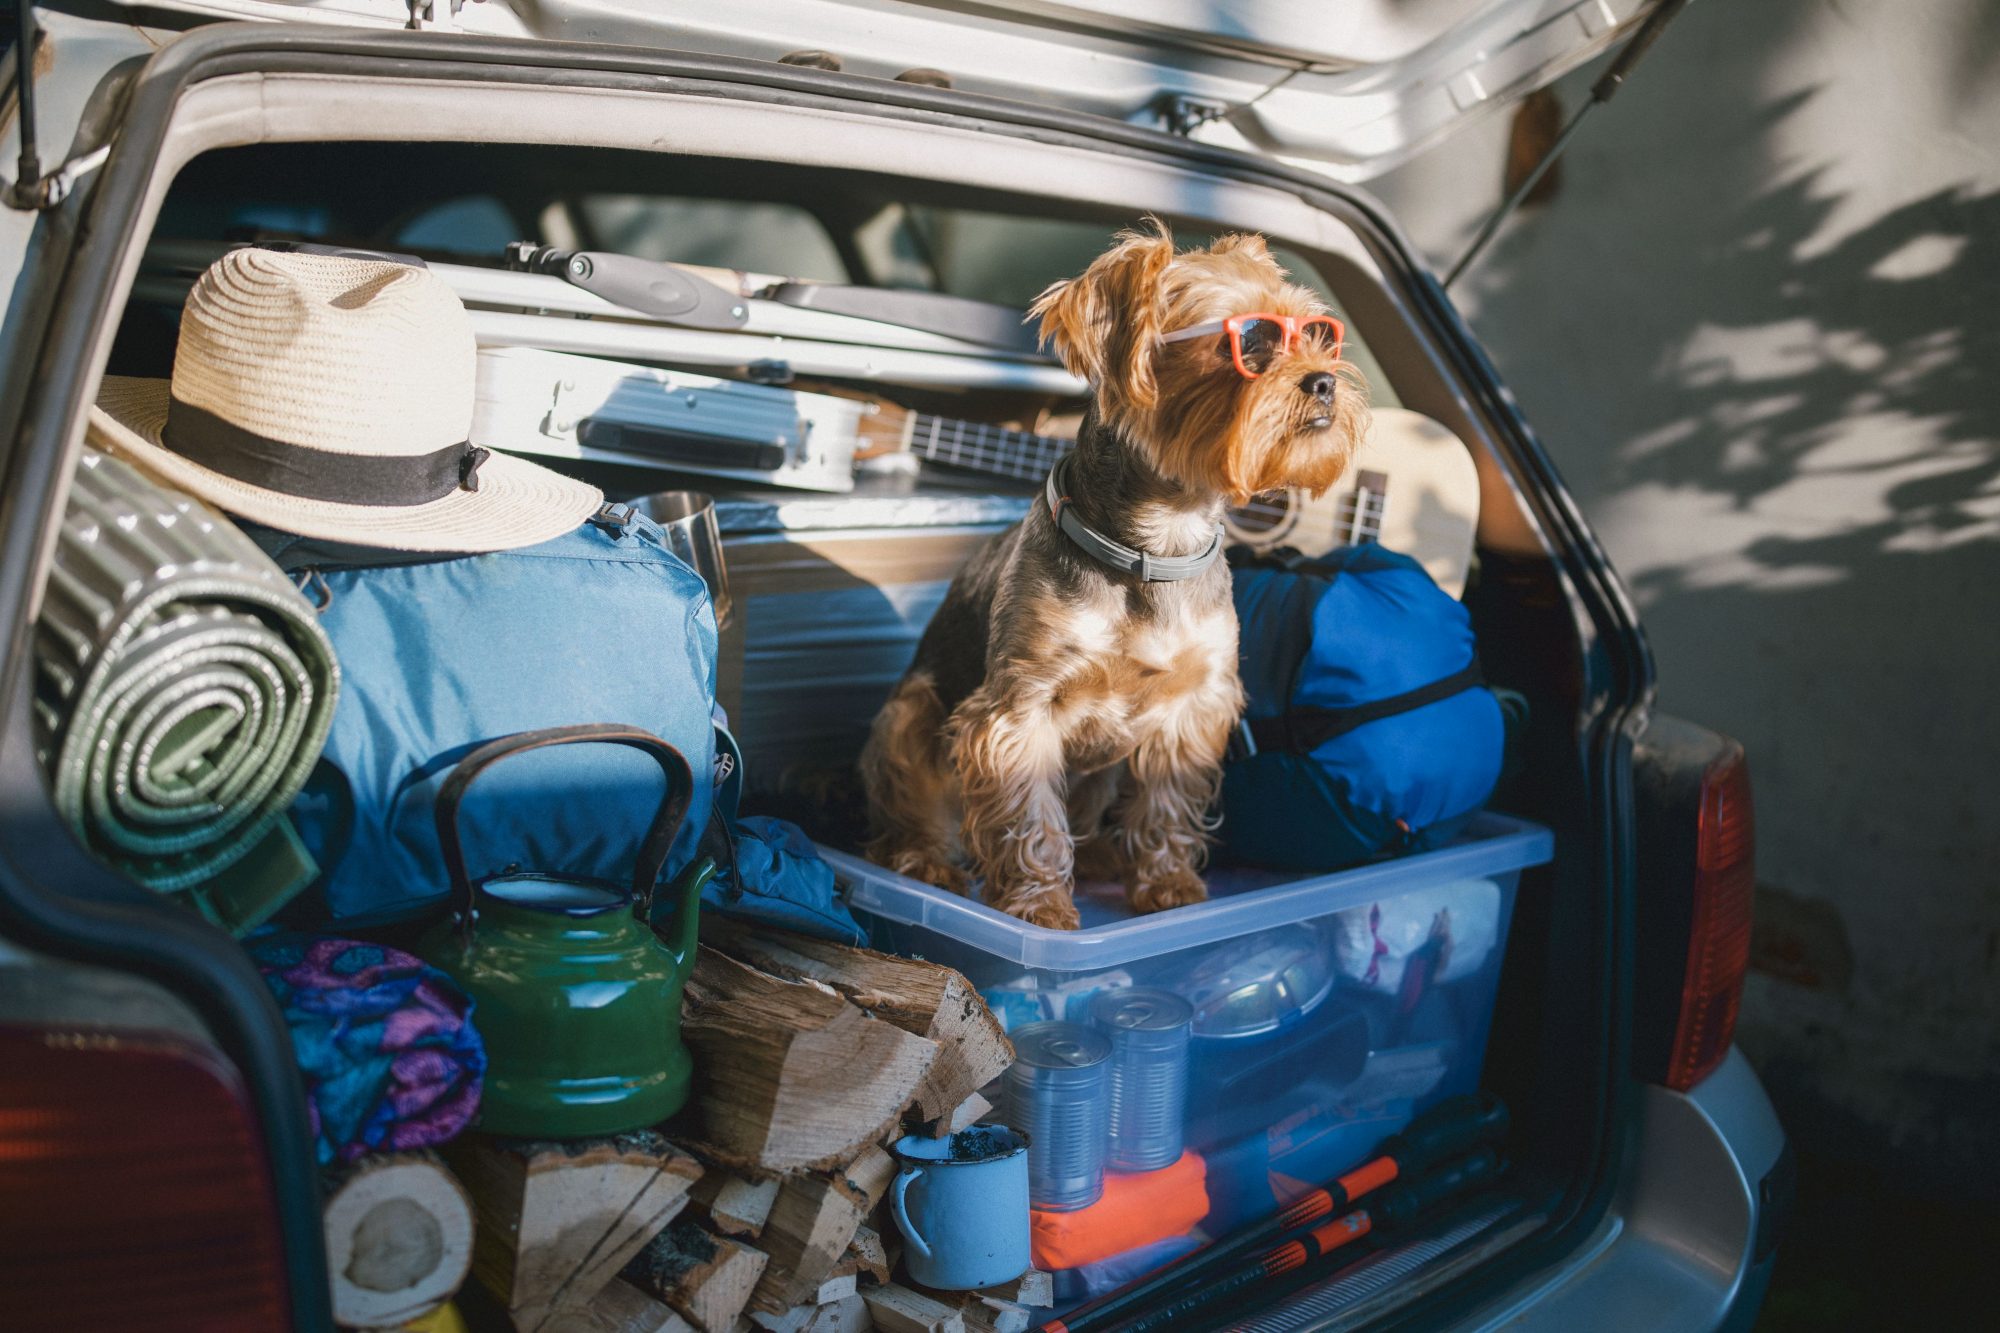 Yorkshire terrier dog wearing sunglasses sitting the back of a packed car ready for a vacation.